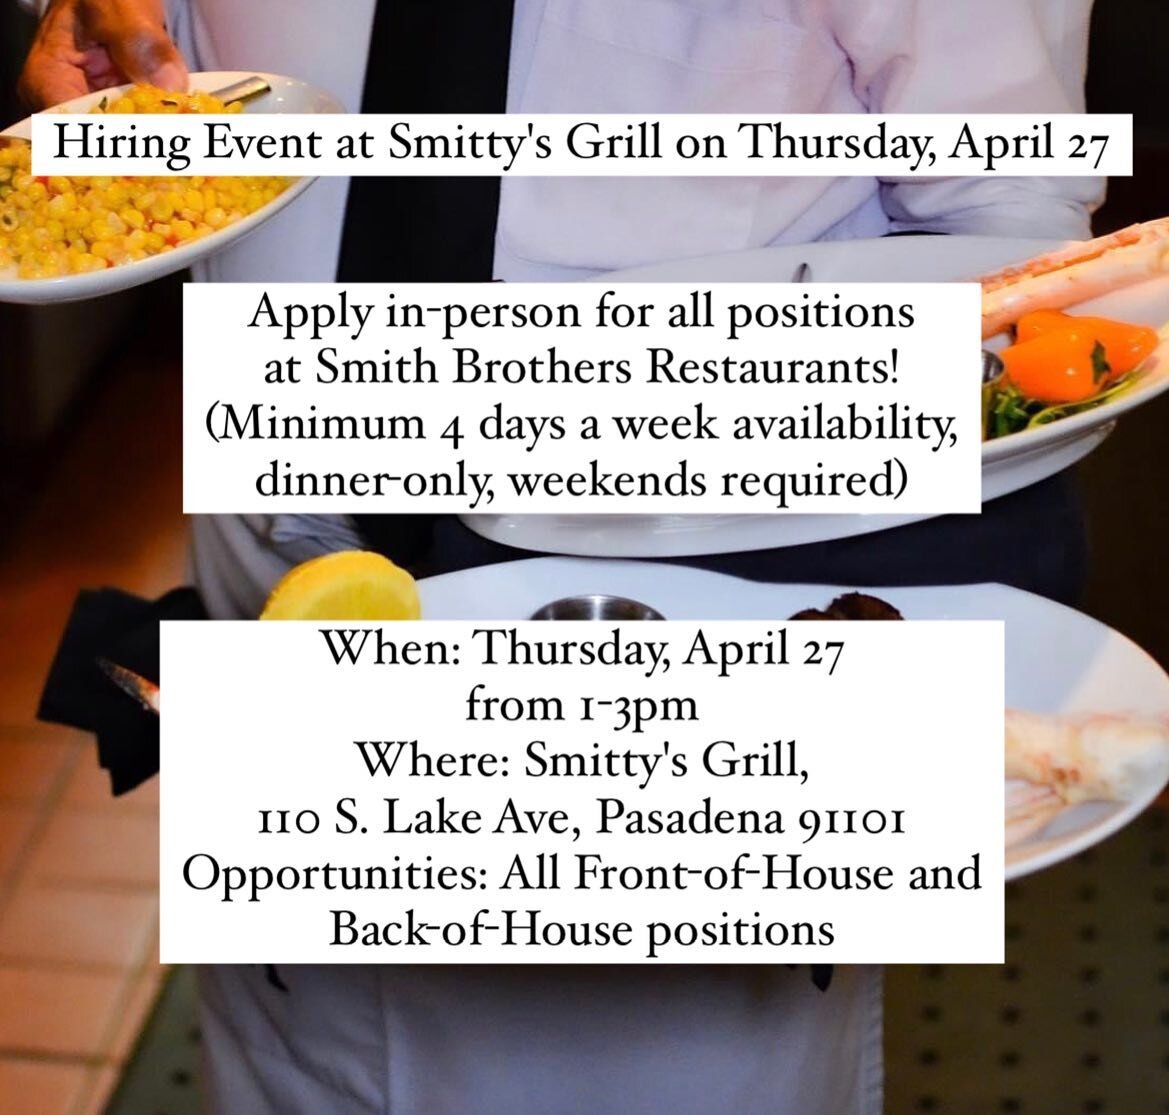 📣Looking for qualified applicants to apply in-person for all restaurant positions this Thursday, April 27th at Smitty&rsquo;s Grill! Mark your calendars and spread the word!
.
.
.
.
.
#parkwaygrill #smittysgrill #arroyochophouse #pasadenaca #visitpa